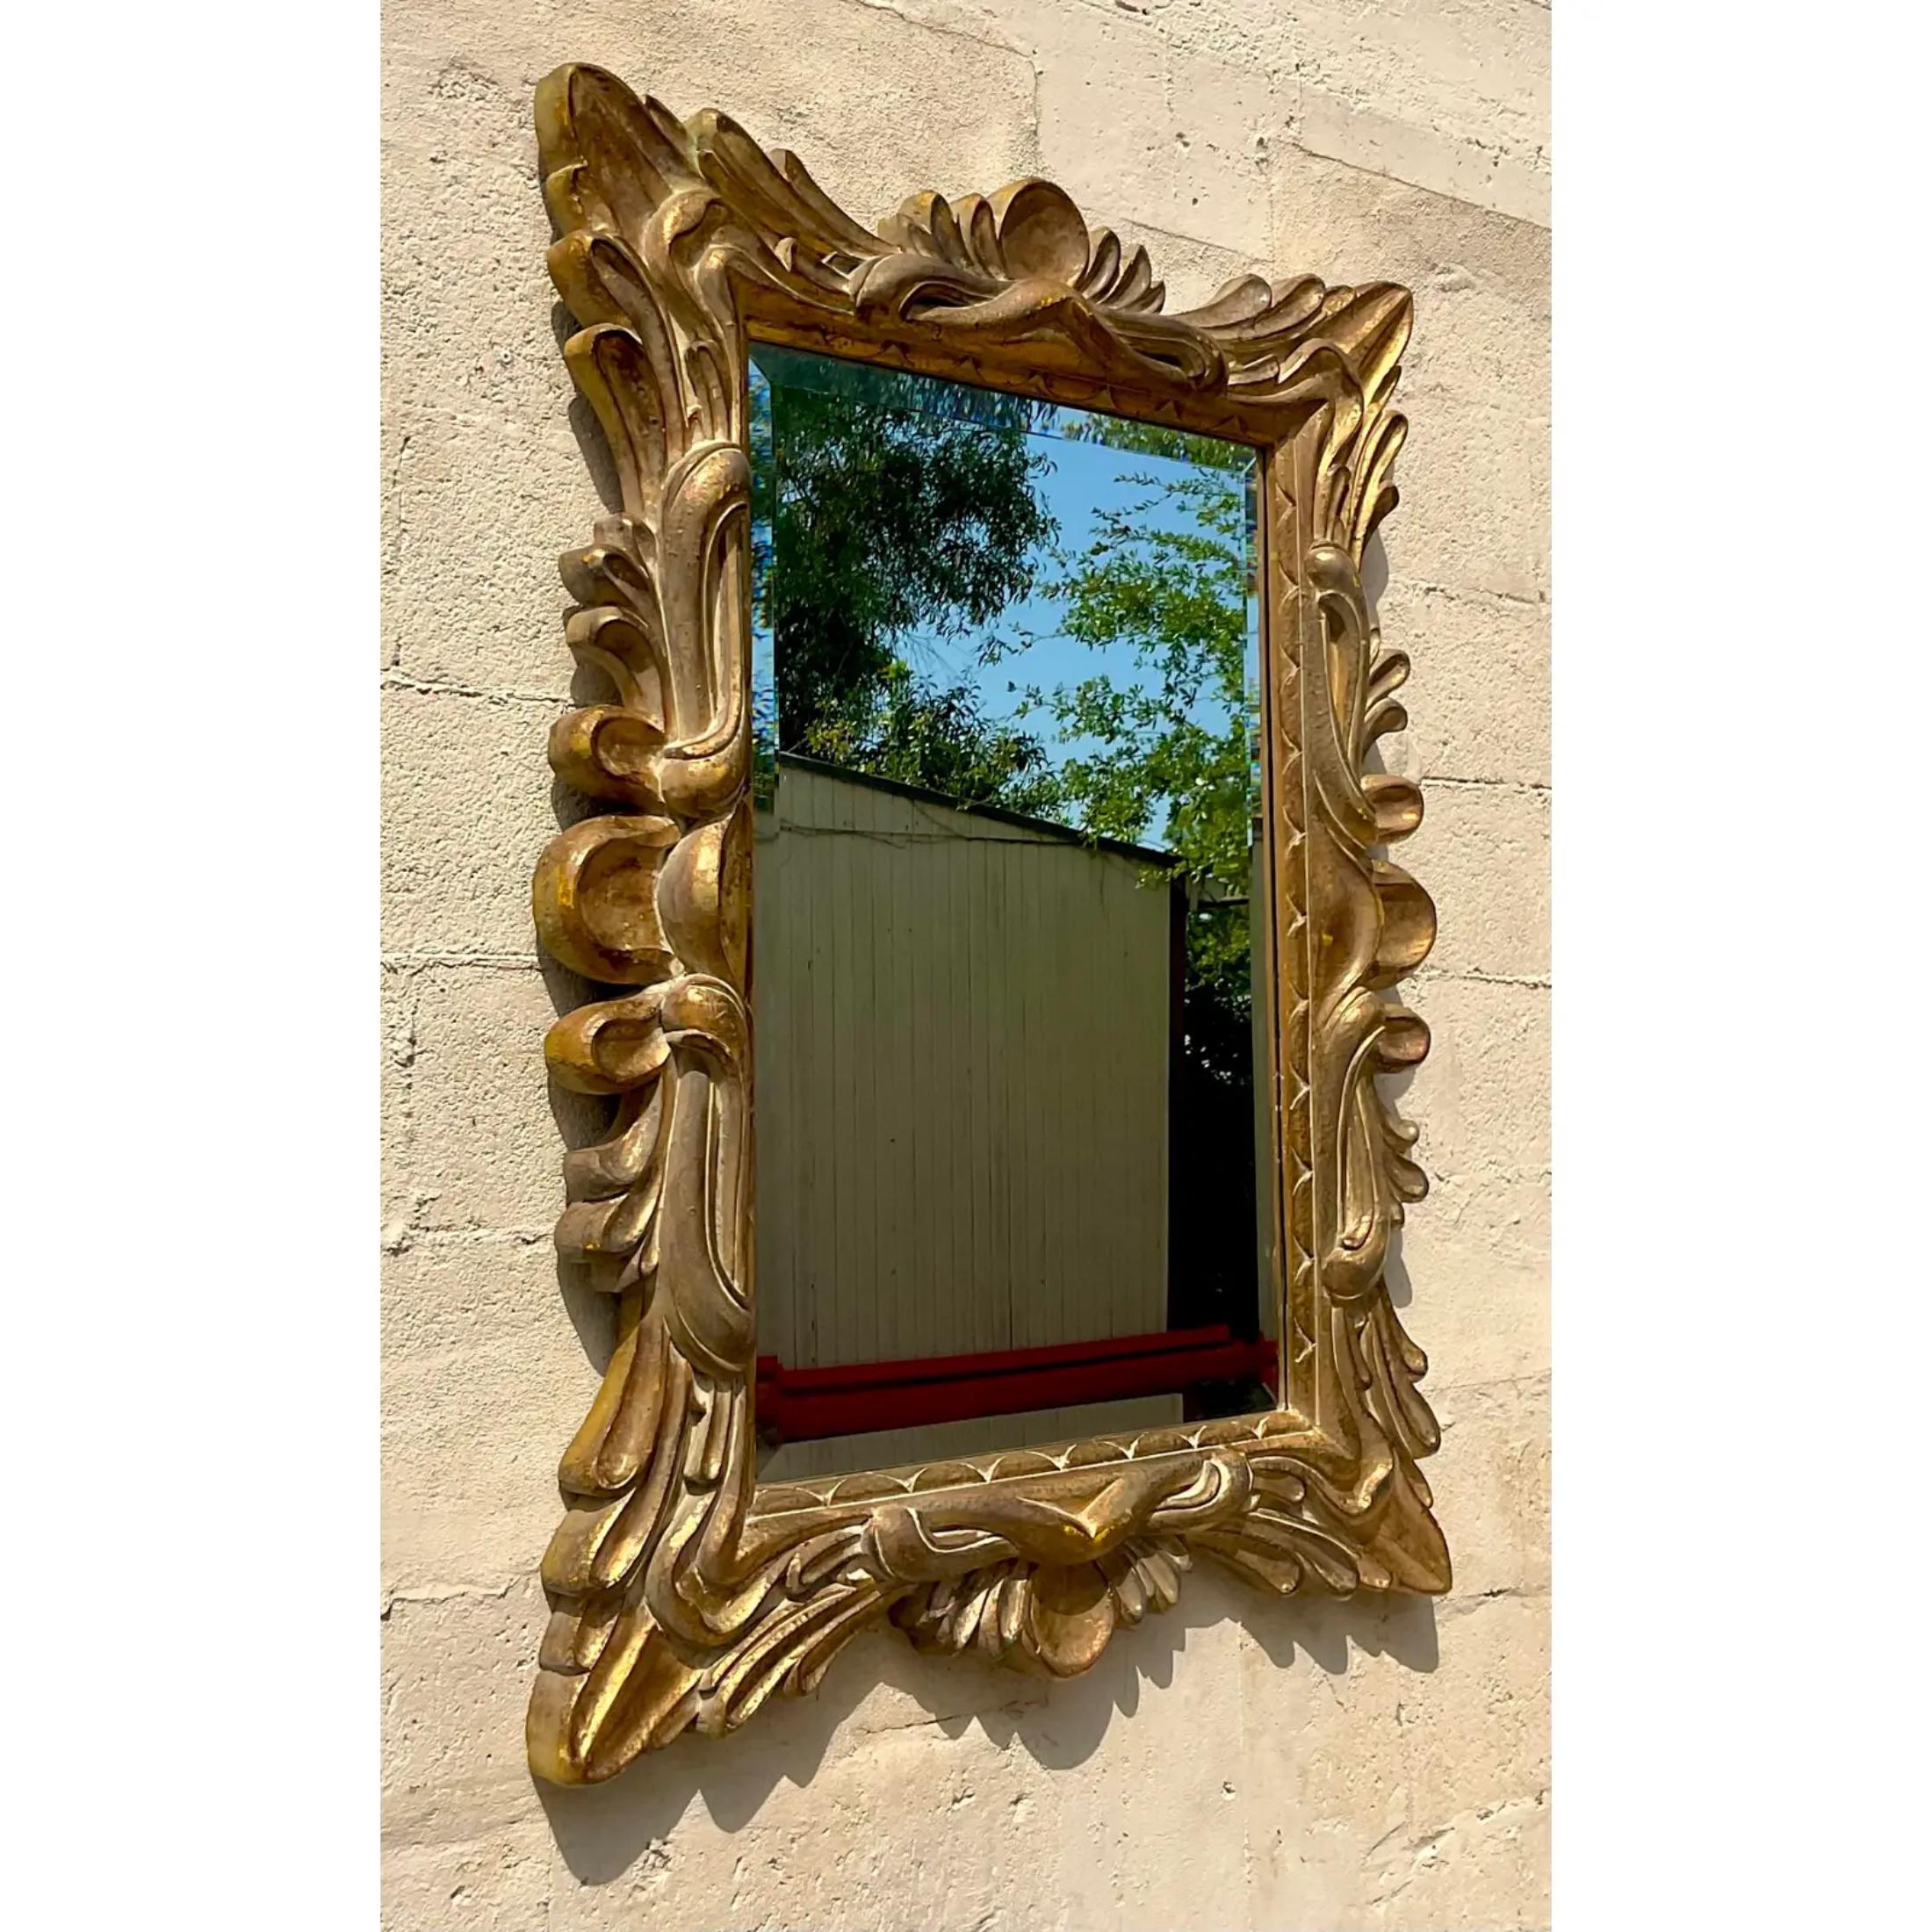 A fantastic vintage Regency gilt mirror. A chic molded composite covered in bright gold. A beautiful design full of flourish. Two mirrors available on my Chairish page if a pair is needed. Acquired from a Palm Beach estate